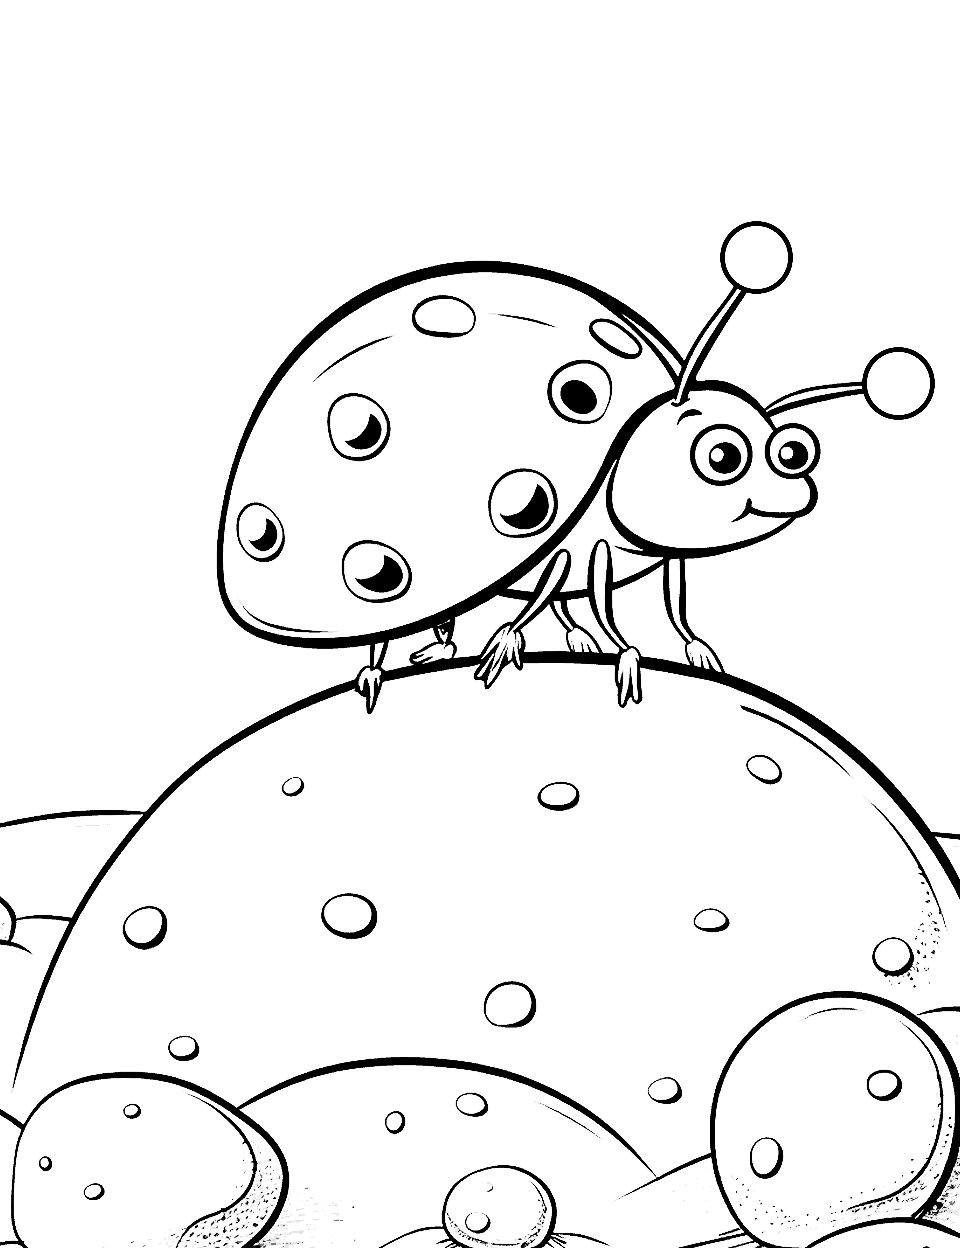 Seven-Spot Ladybird on a Journey Ladybug Coloring Page - A Seven-spot ladybird trekking across a series of small stones.